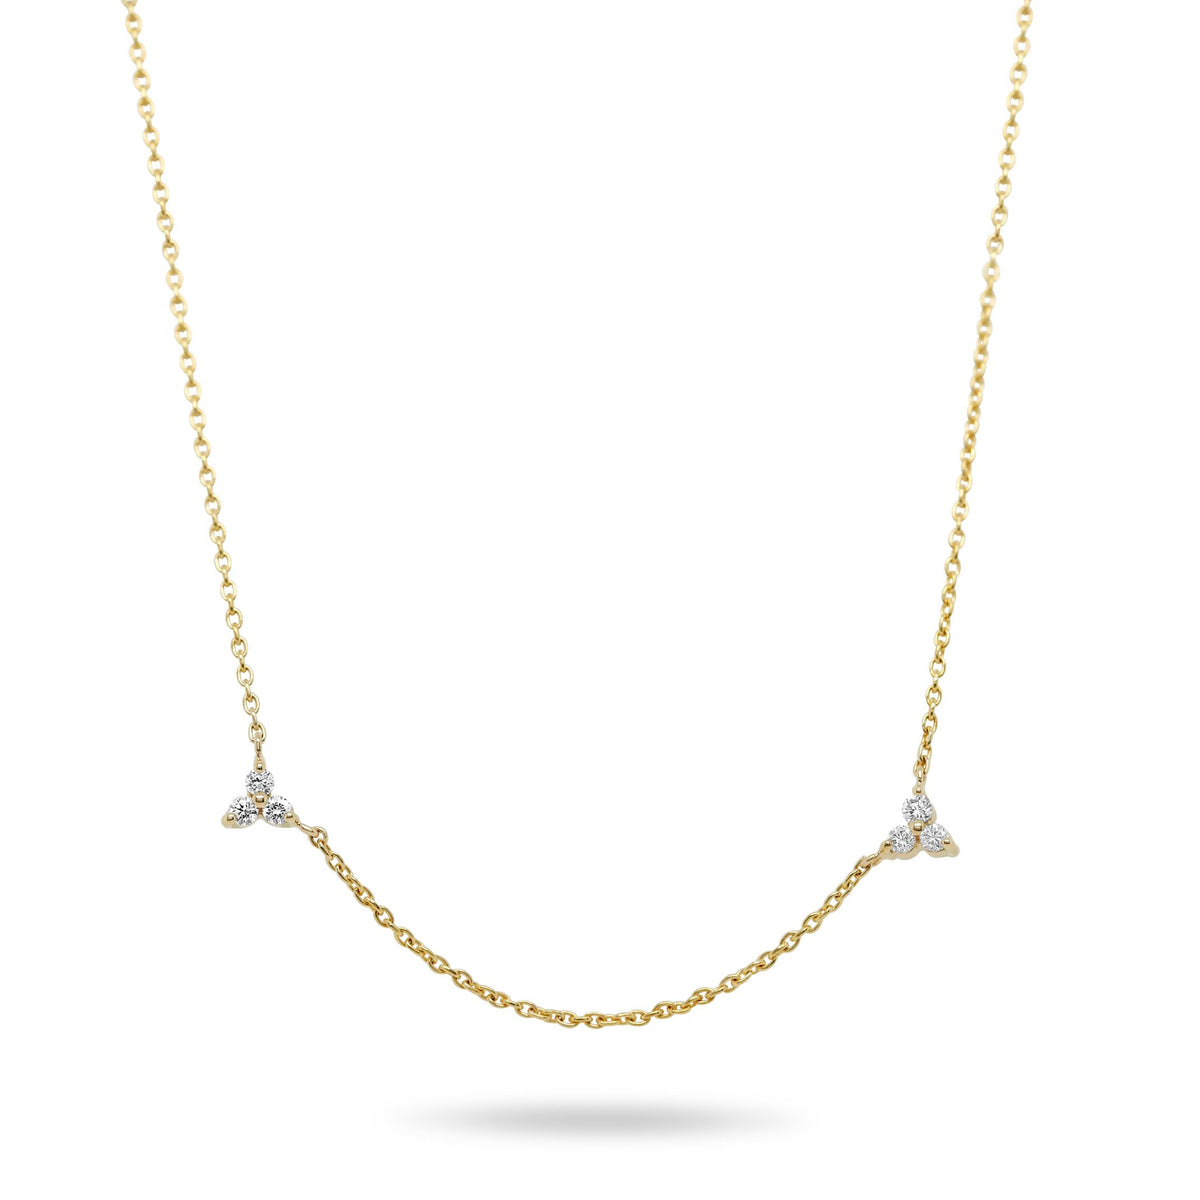 14k yellow gold diamond station necklace 16in chain